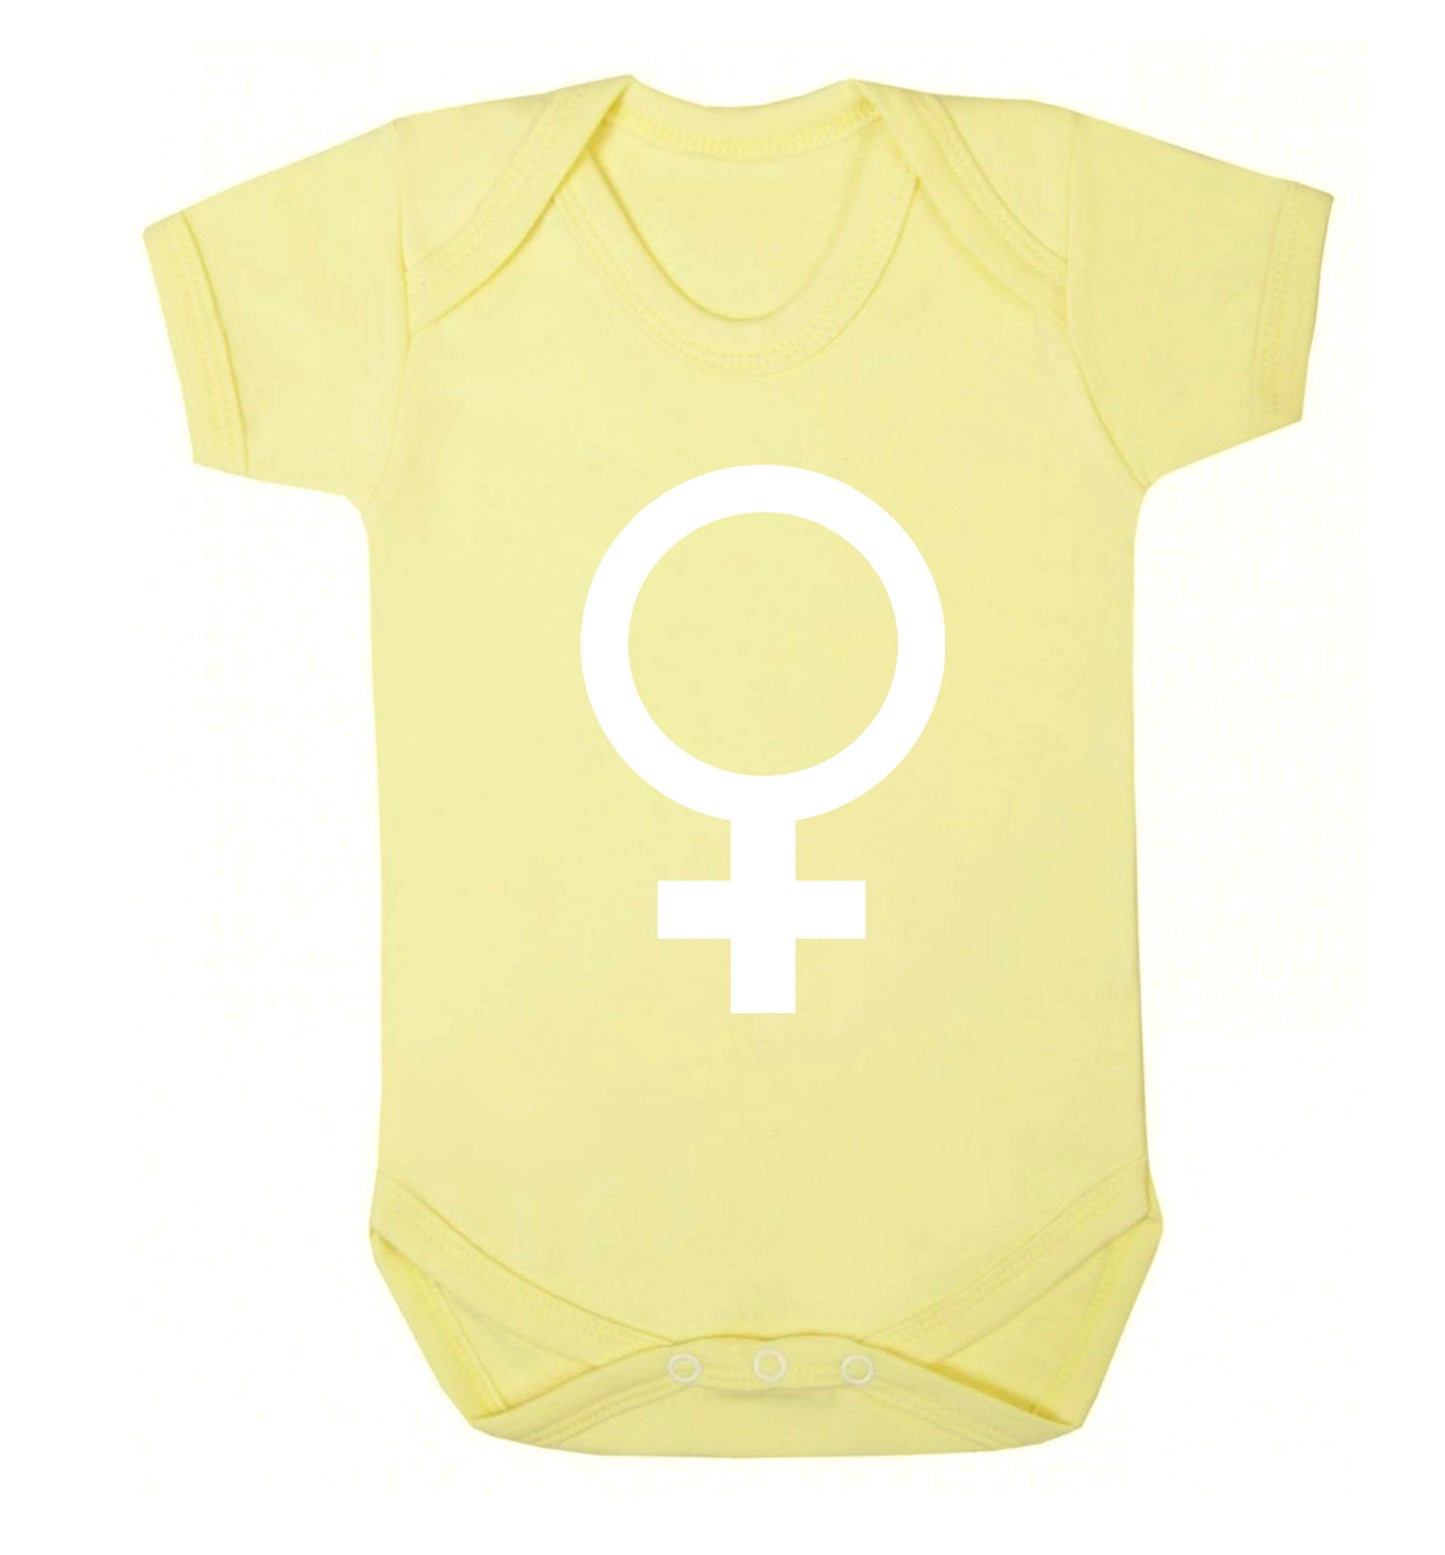 Female symbol large Baby Vest pale yellow 18-24 months